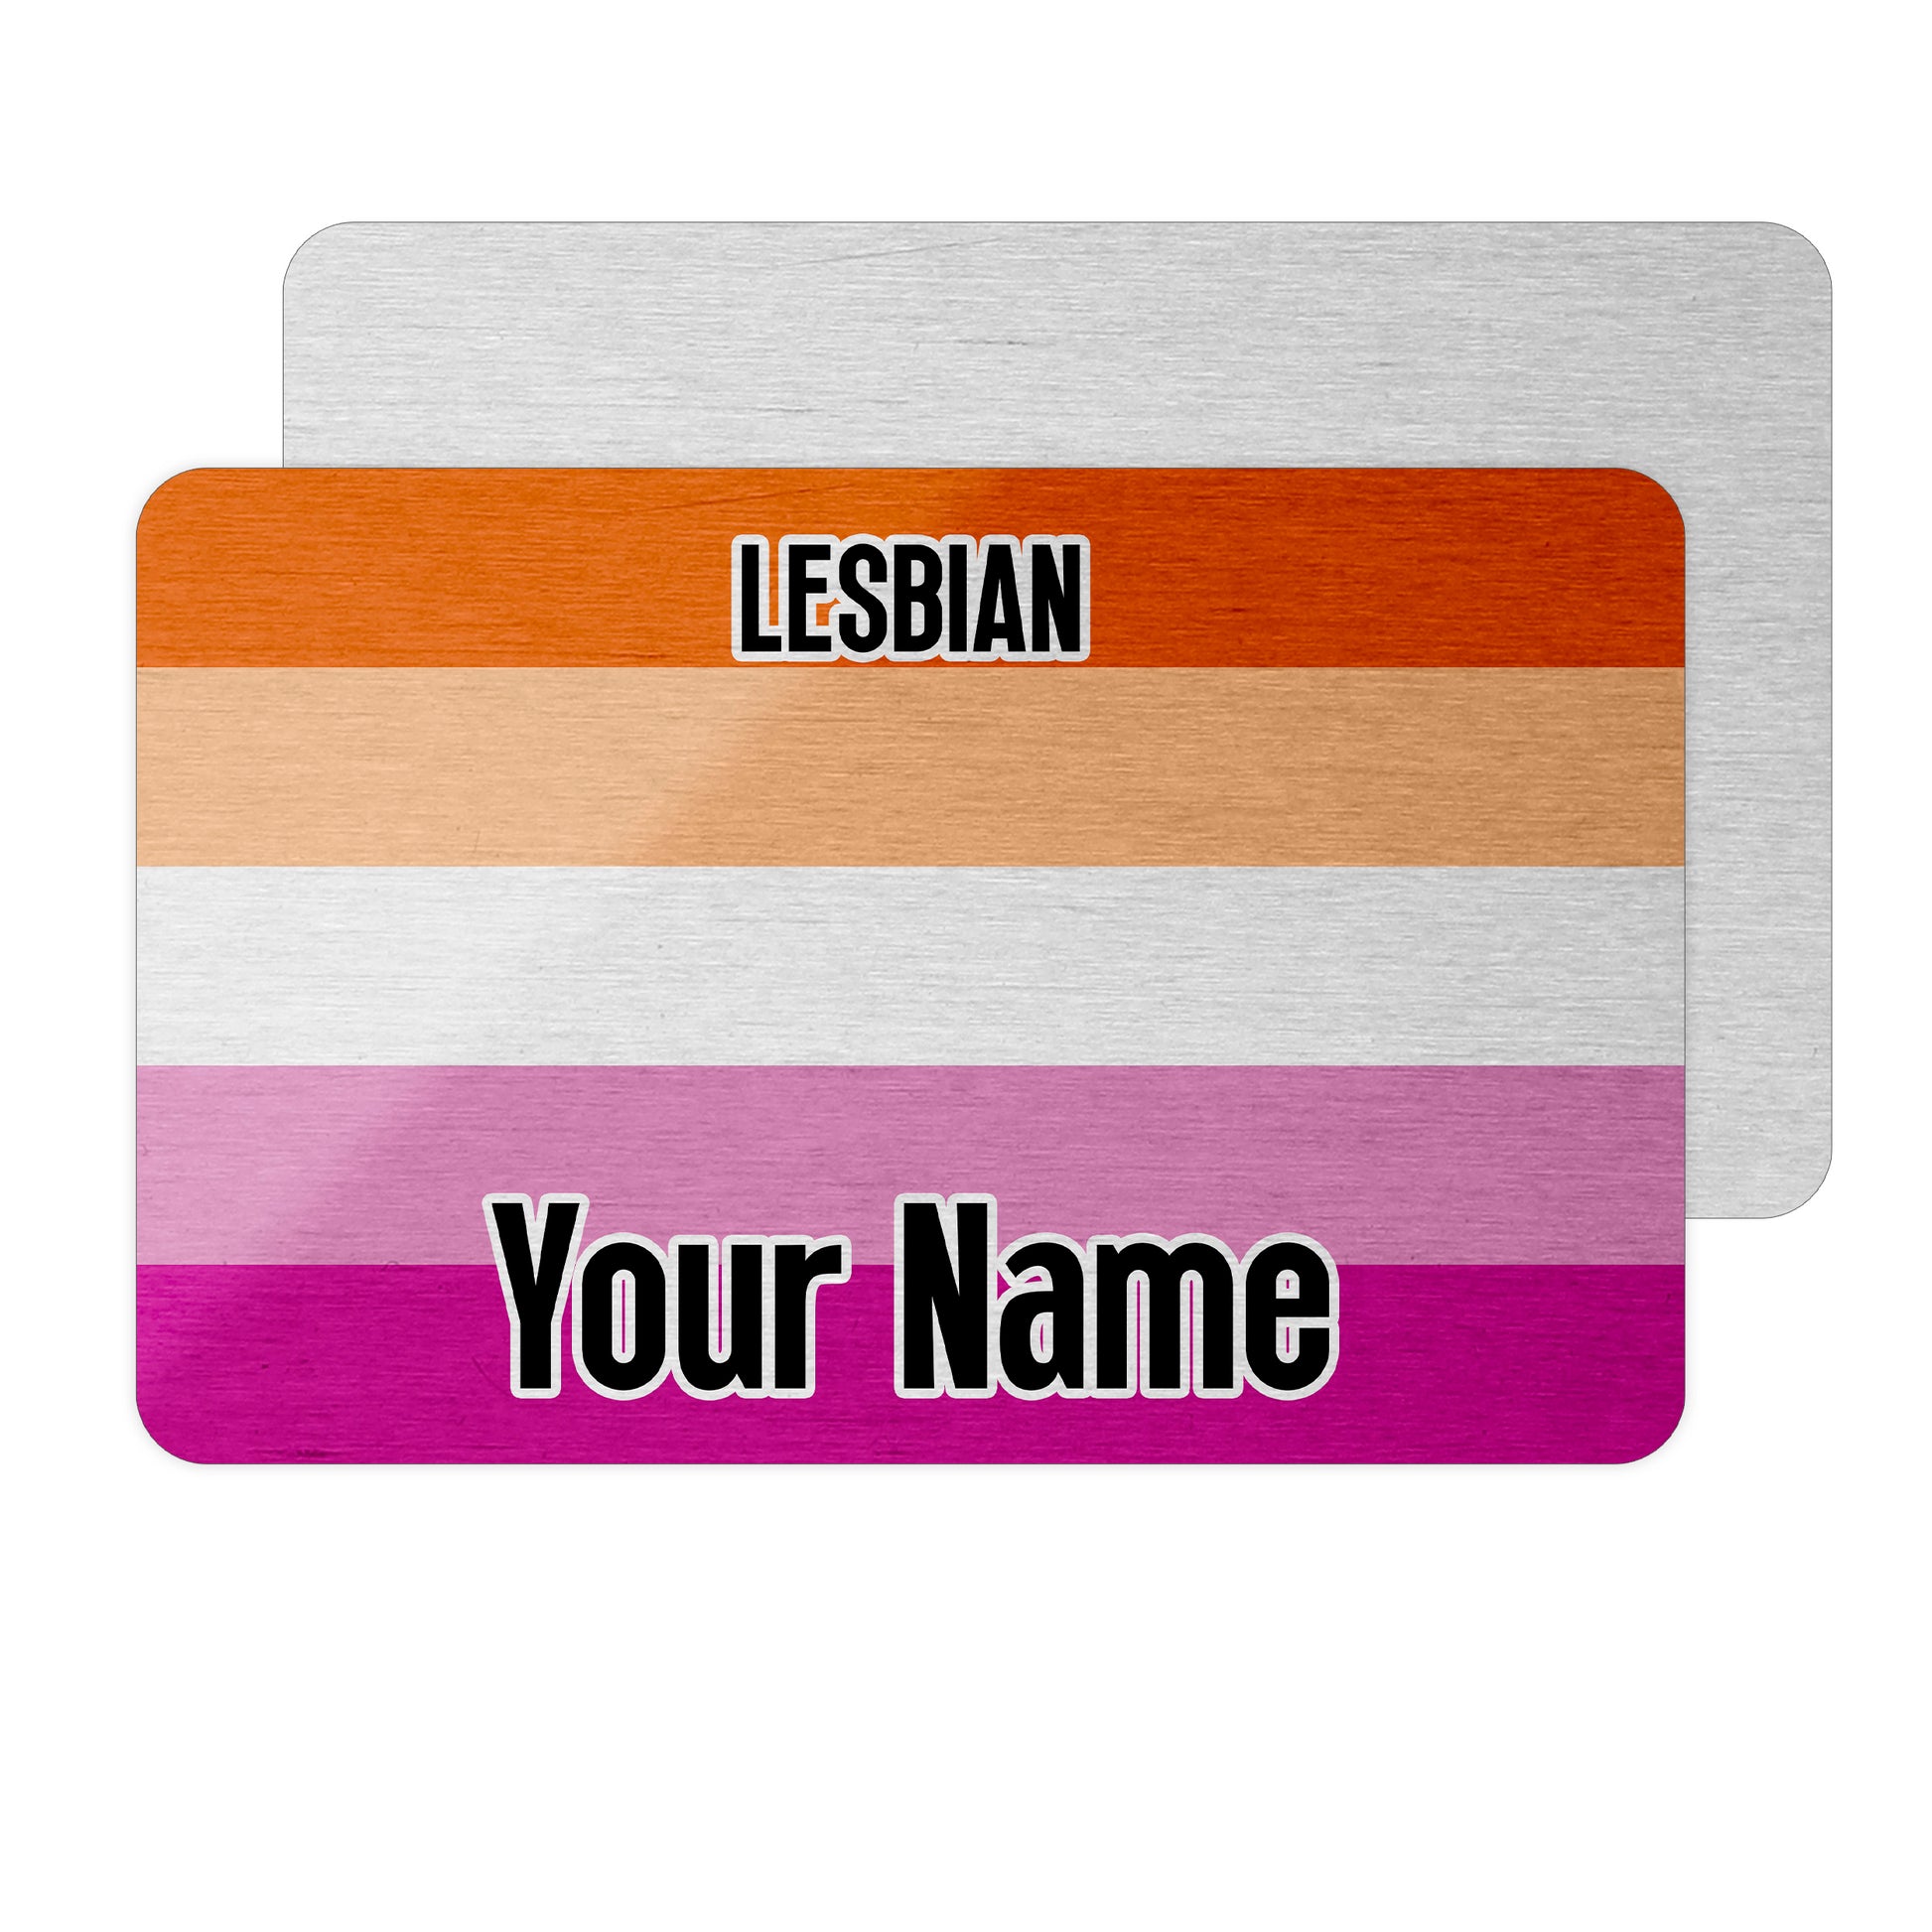 Aluminium metal wallet card personalised with your name and the lesbian pride flag